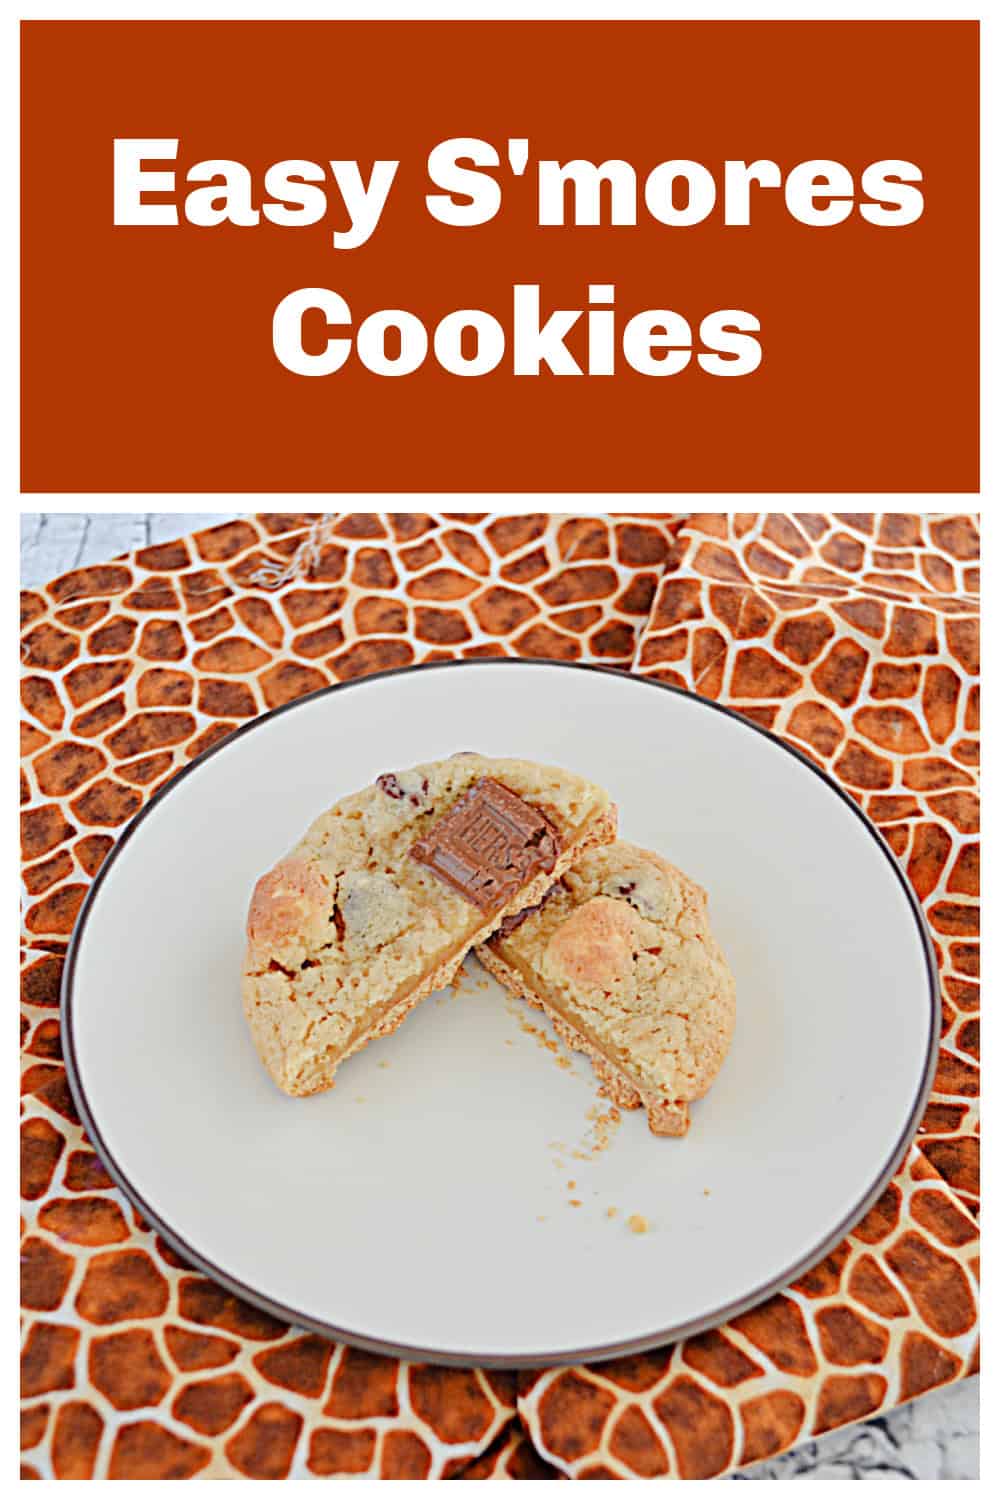 Pin Image: Text title, a plate with a S'mores cookie on it cut in half.